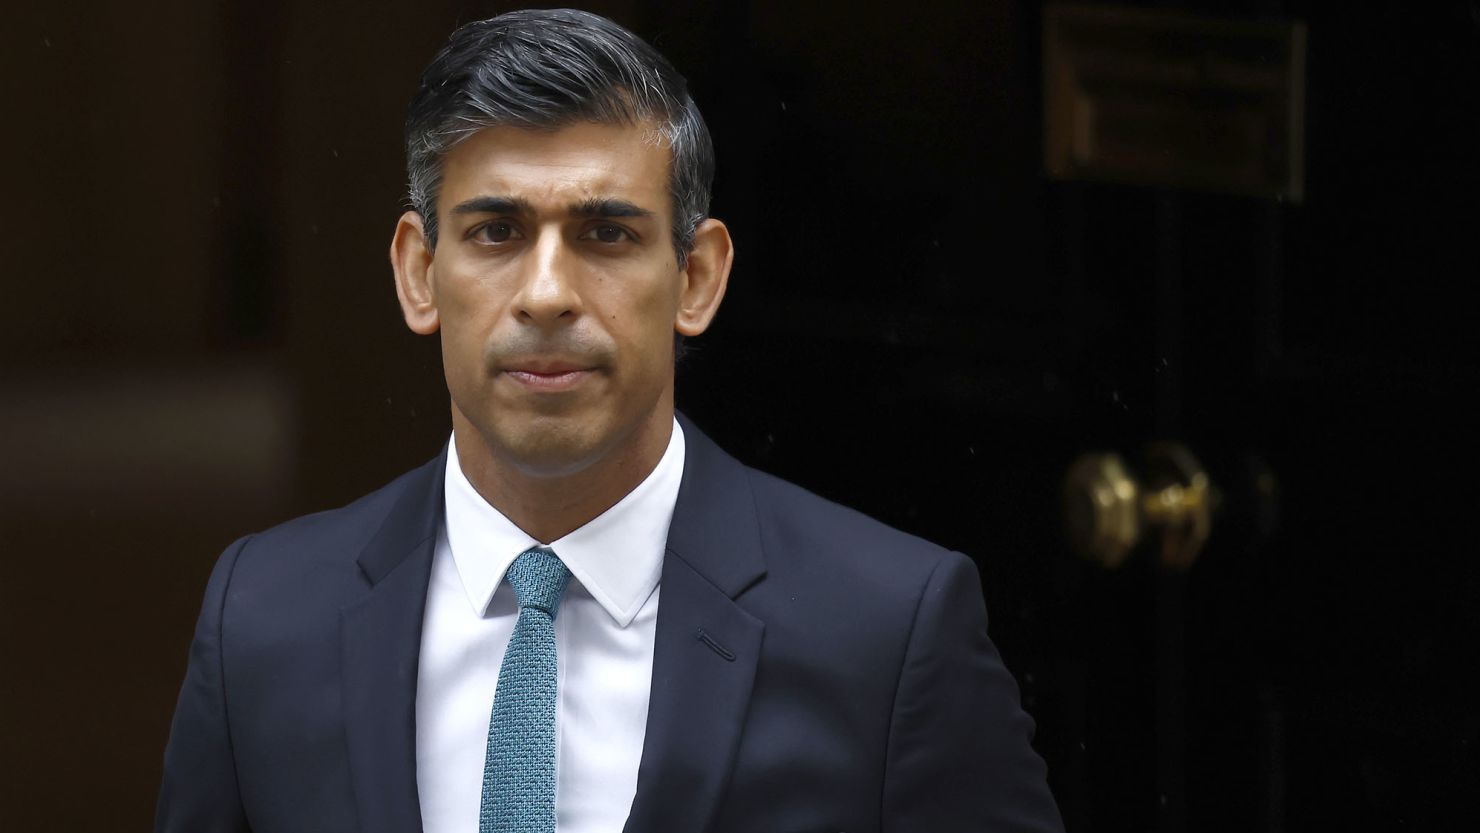 Britain's Prime Minister Rishi Sunak has reached the 100 days in office milestone.